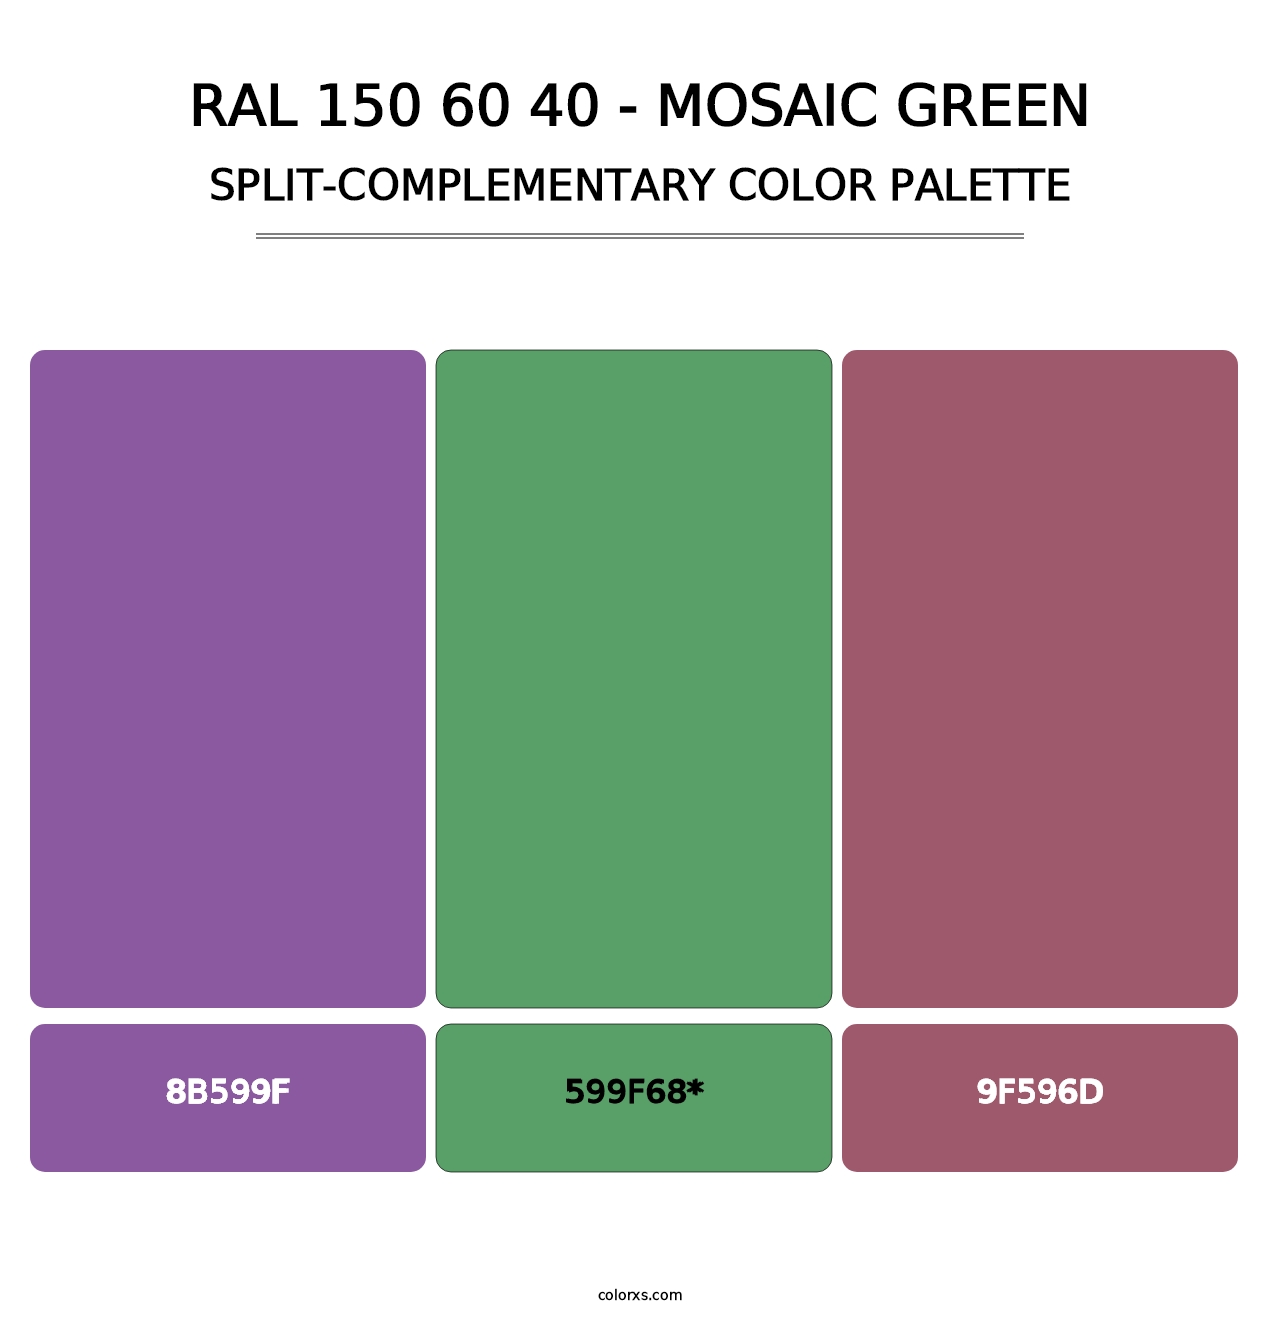 RAL 150 60 40 - Mosaic Green - Split-Complementary Color Palette